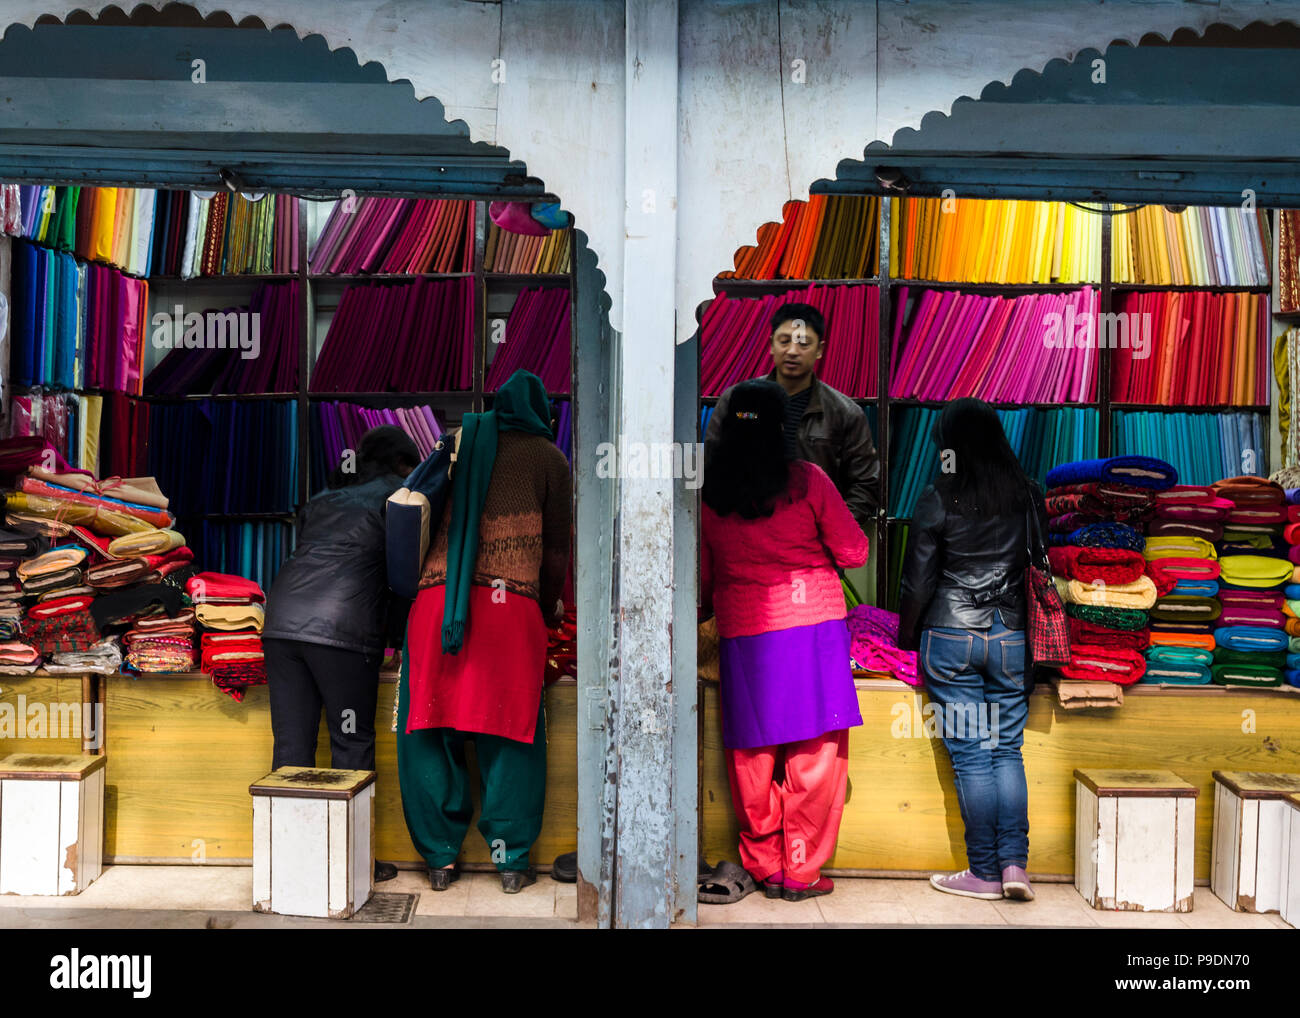 Indian Fabric Shop Kathmandu Nepal High-Res Stock Photo - Getty Images